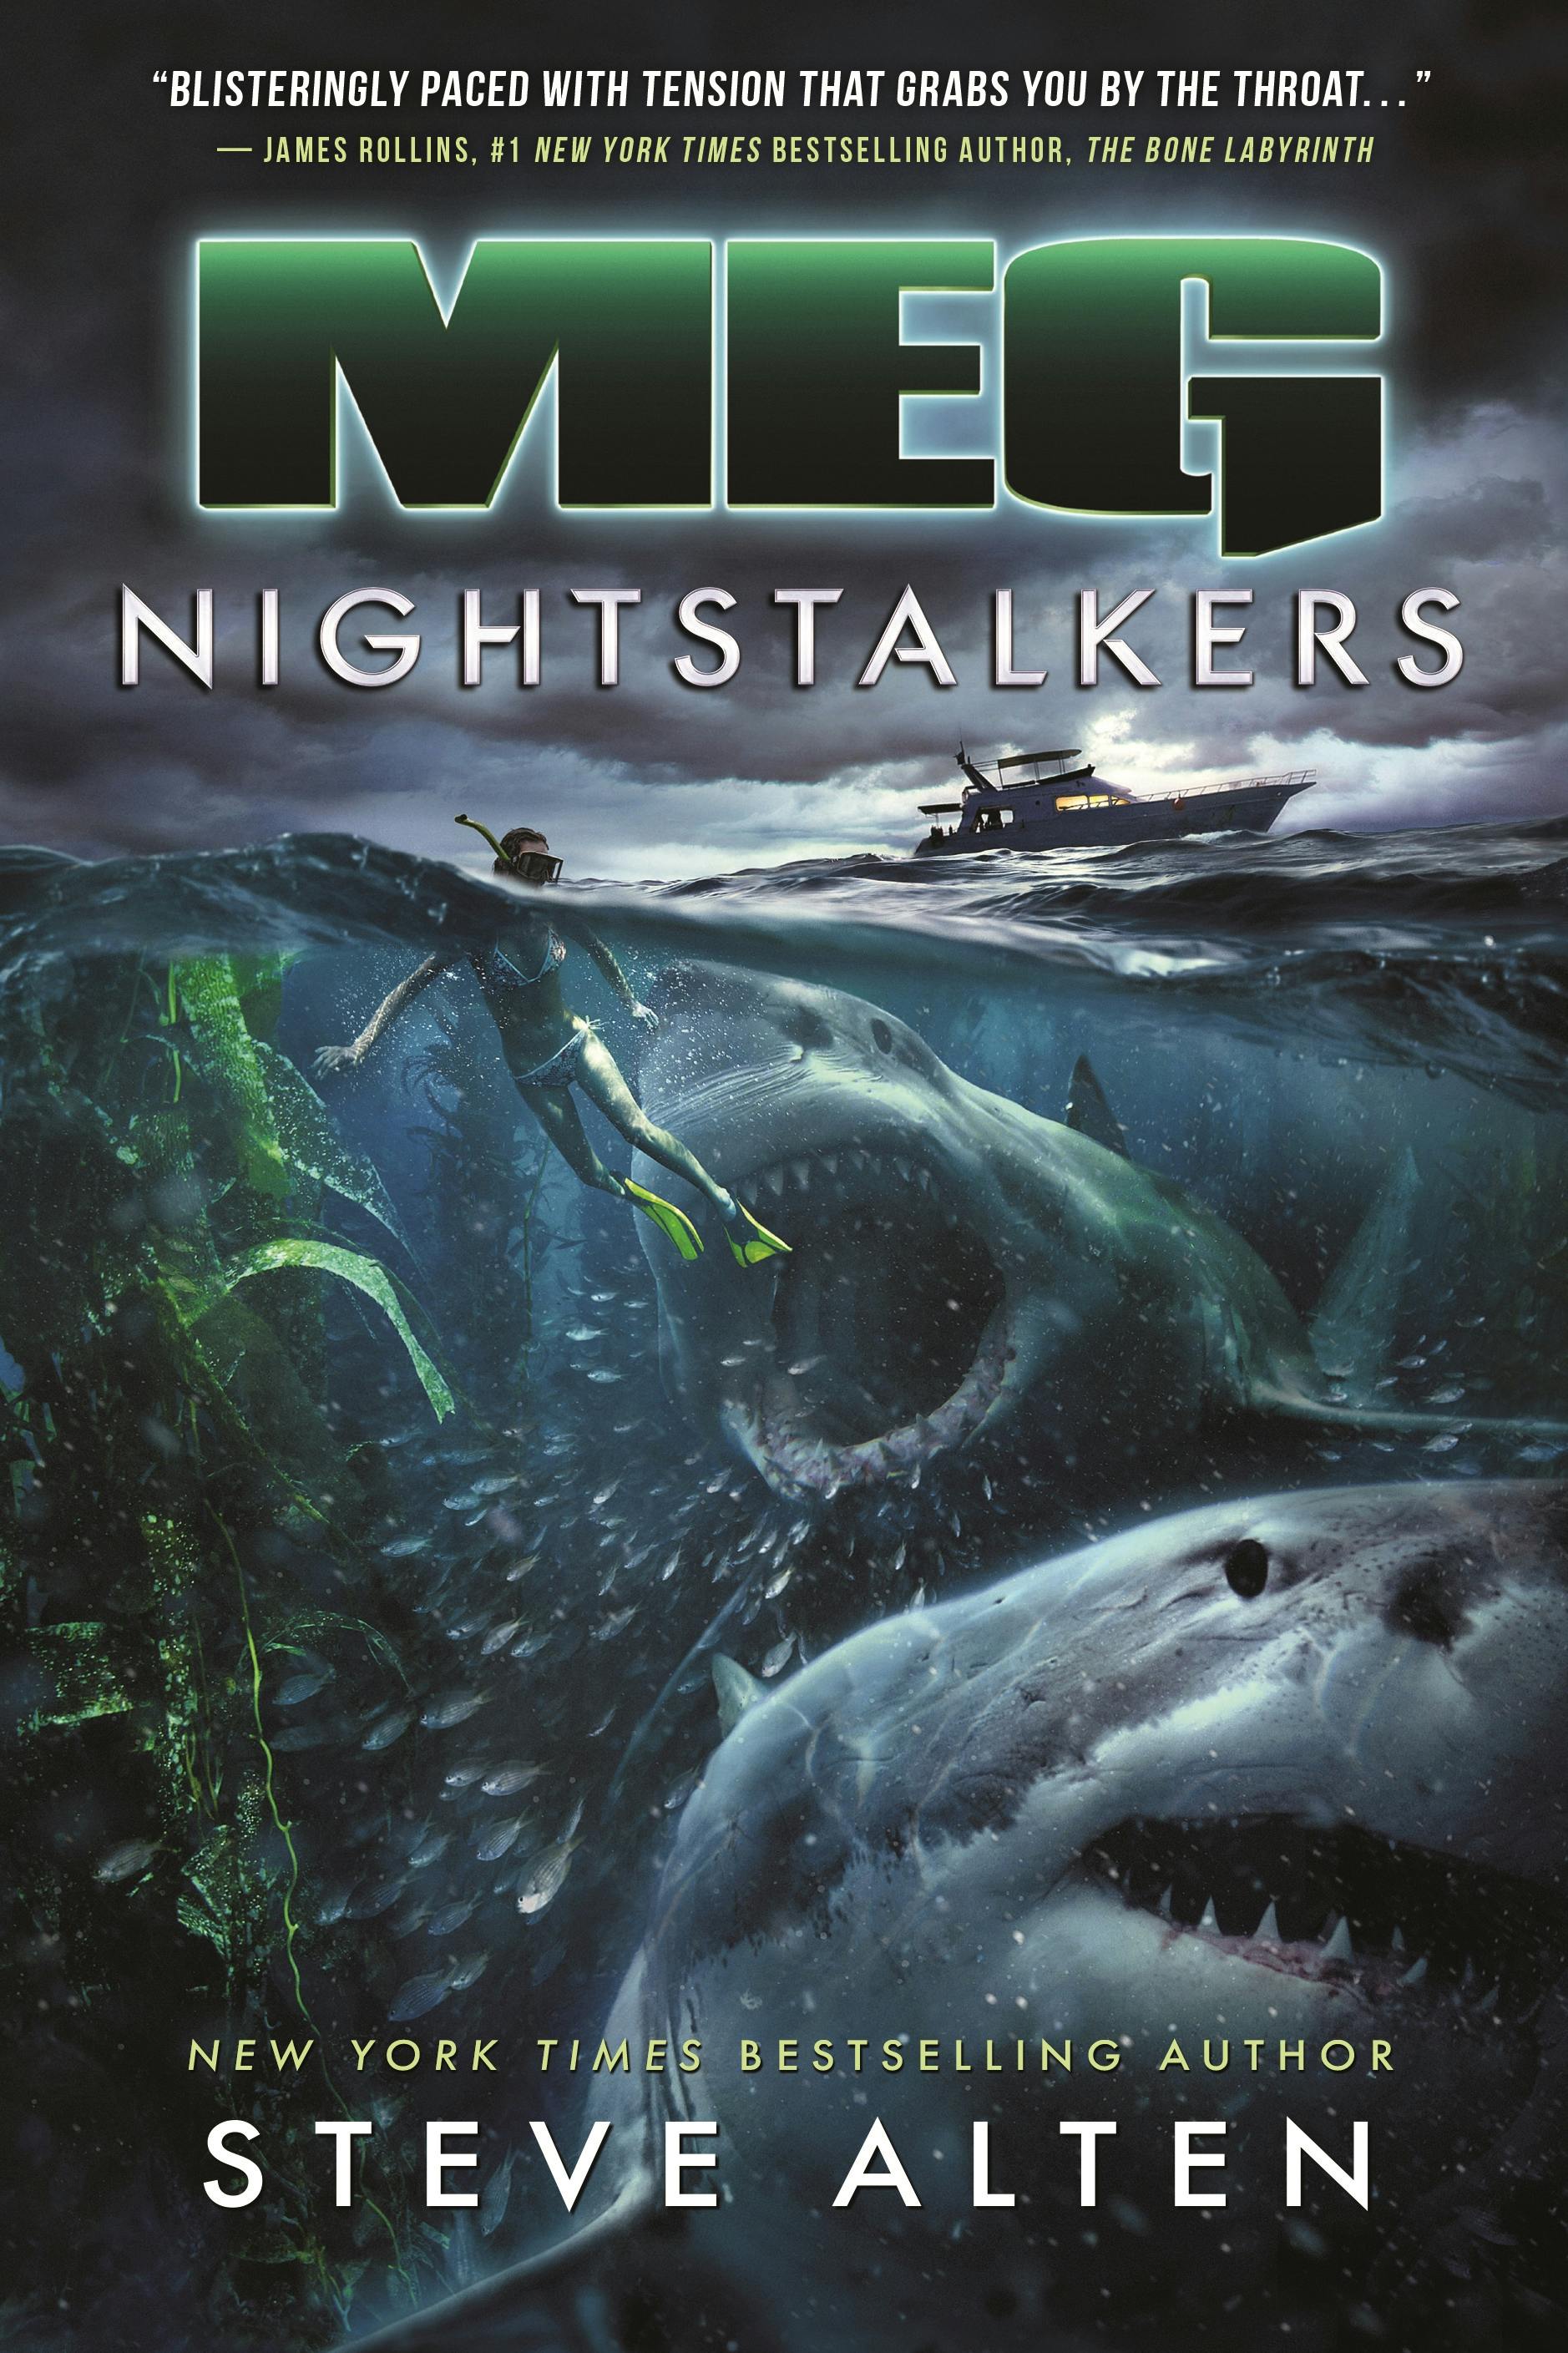 Cover for the book titled as: MEG: Nightstalkers